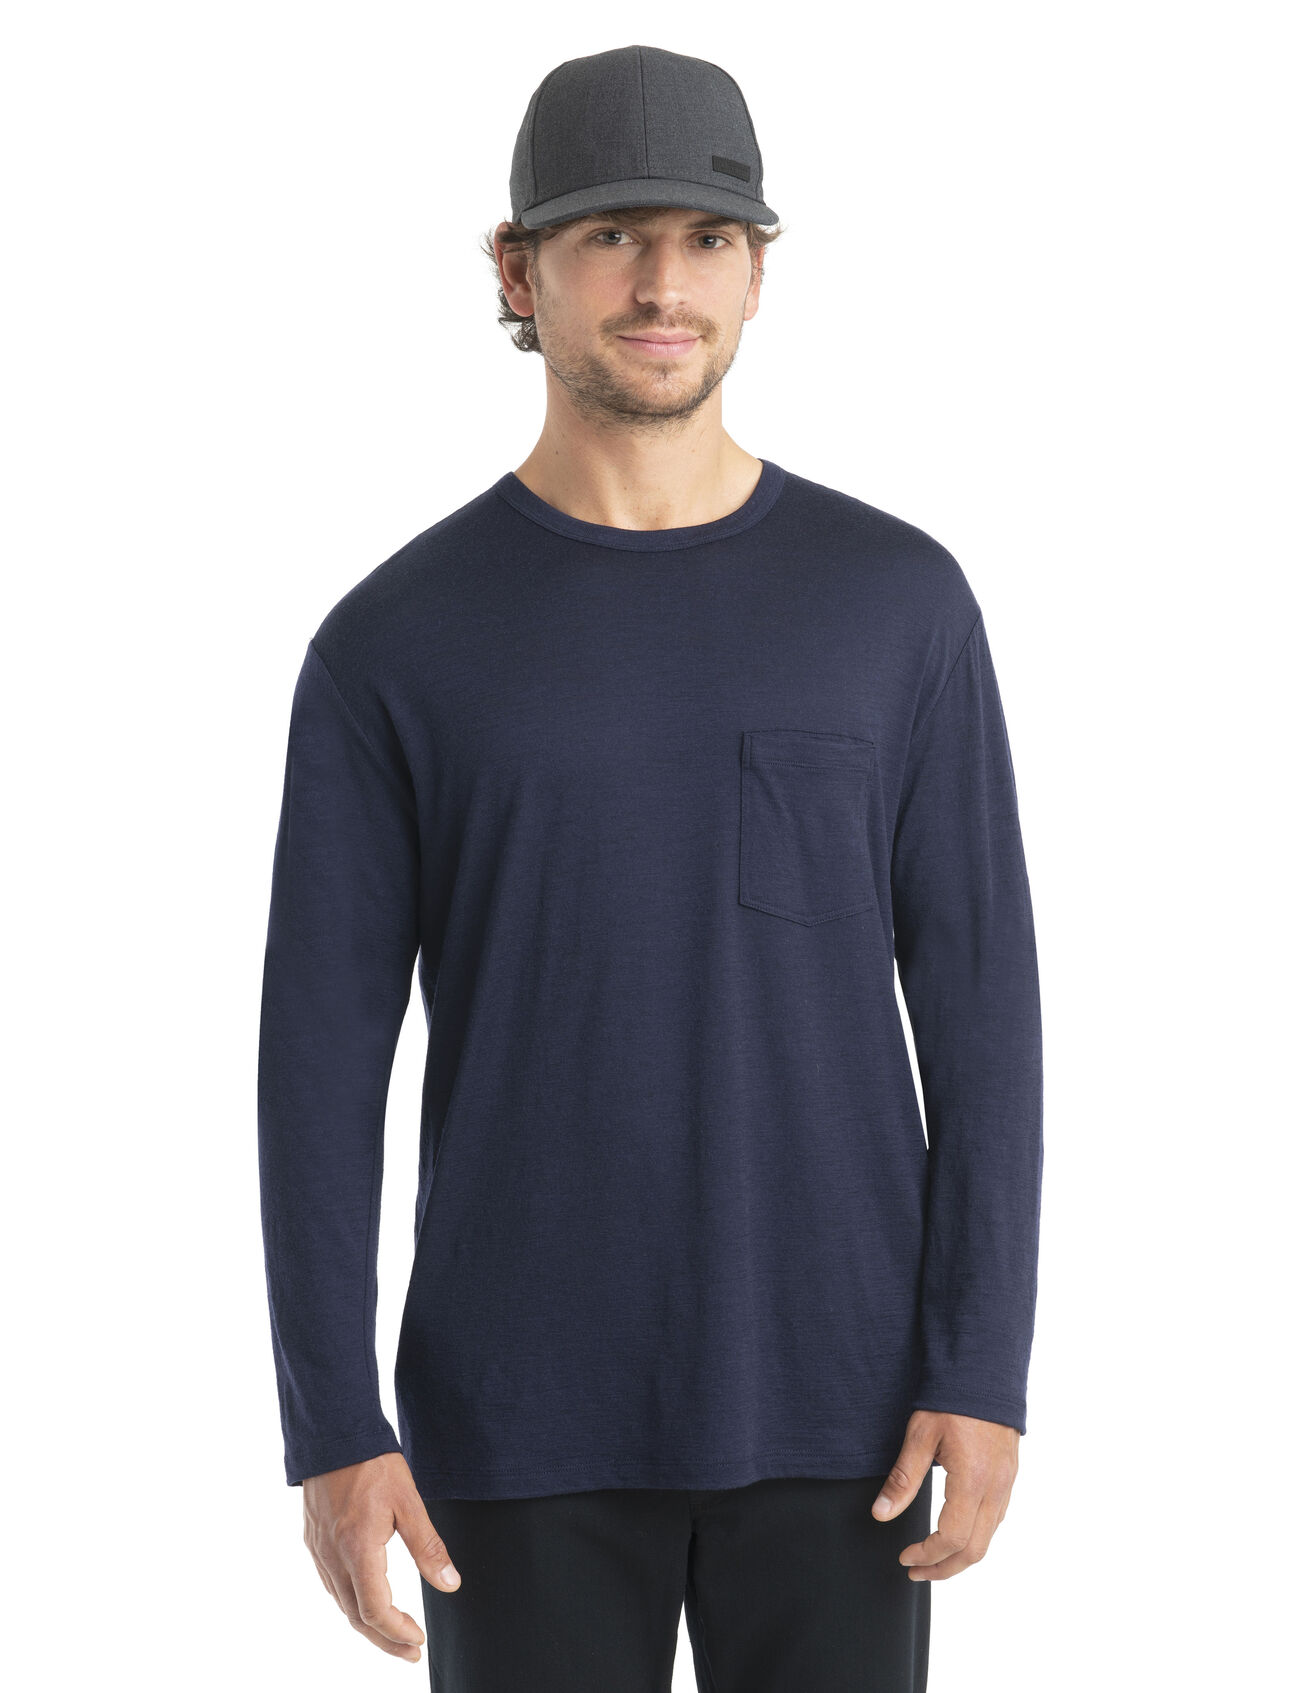 Mens Merino Granary Long Sleeve Pocket T-Shirt A classic pocket tee with a relaxed fit and soft, breathable, 100% merino wool fabric, the Granary Long Sleeve Pocket Tee is all about everyday comfort and style.